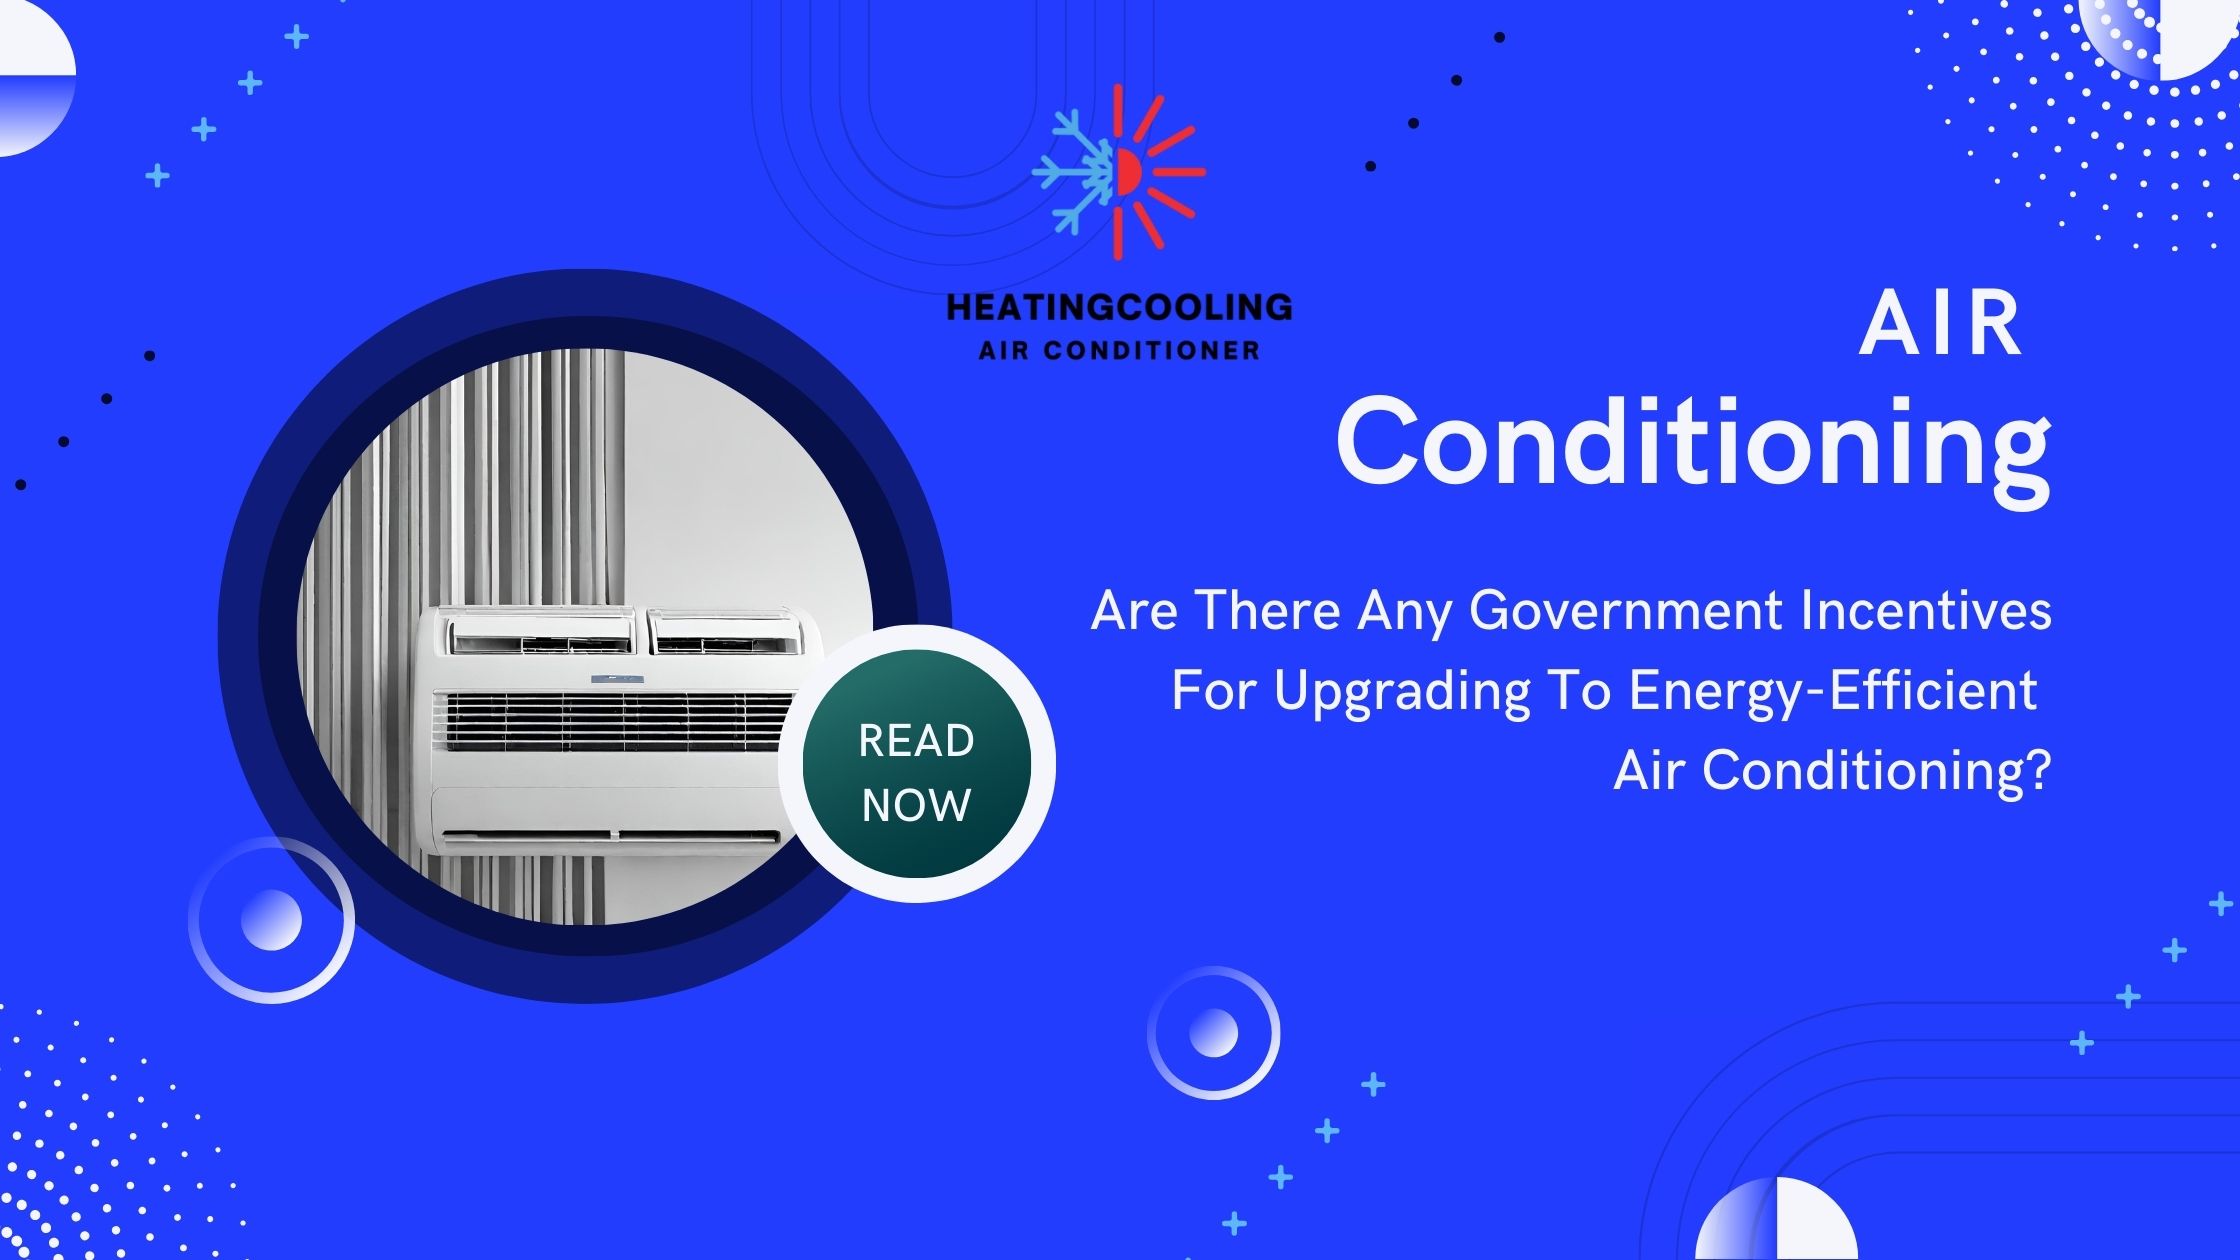 Are There Any Government Incentives For Upgrading To Energy-Efficient Air Conditioning